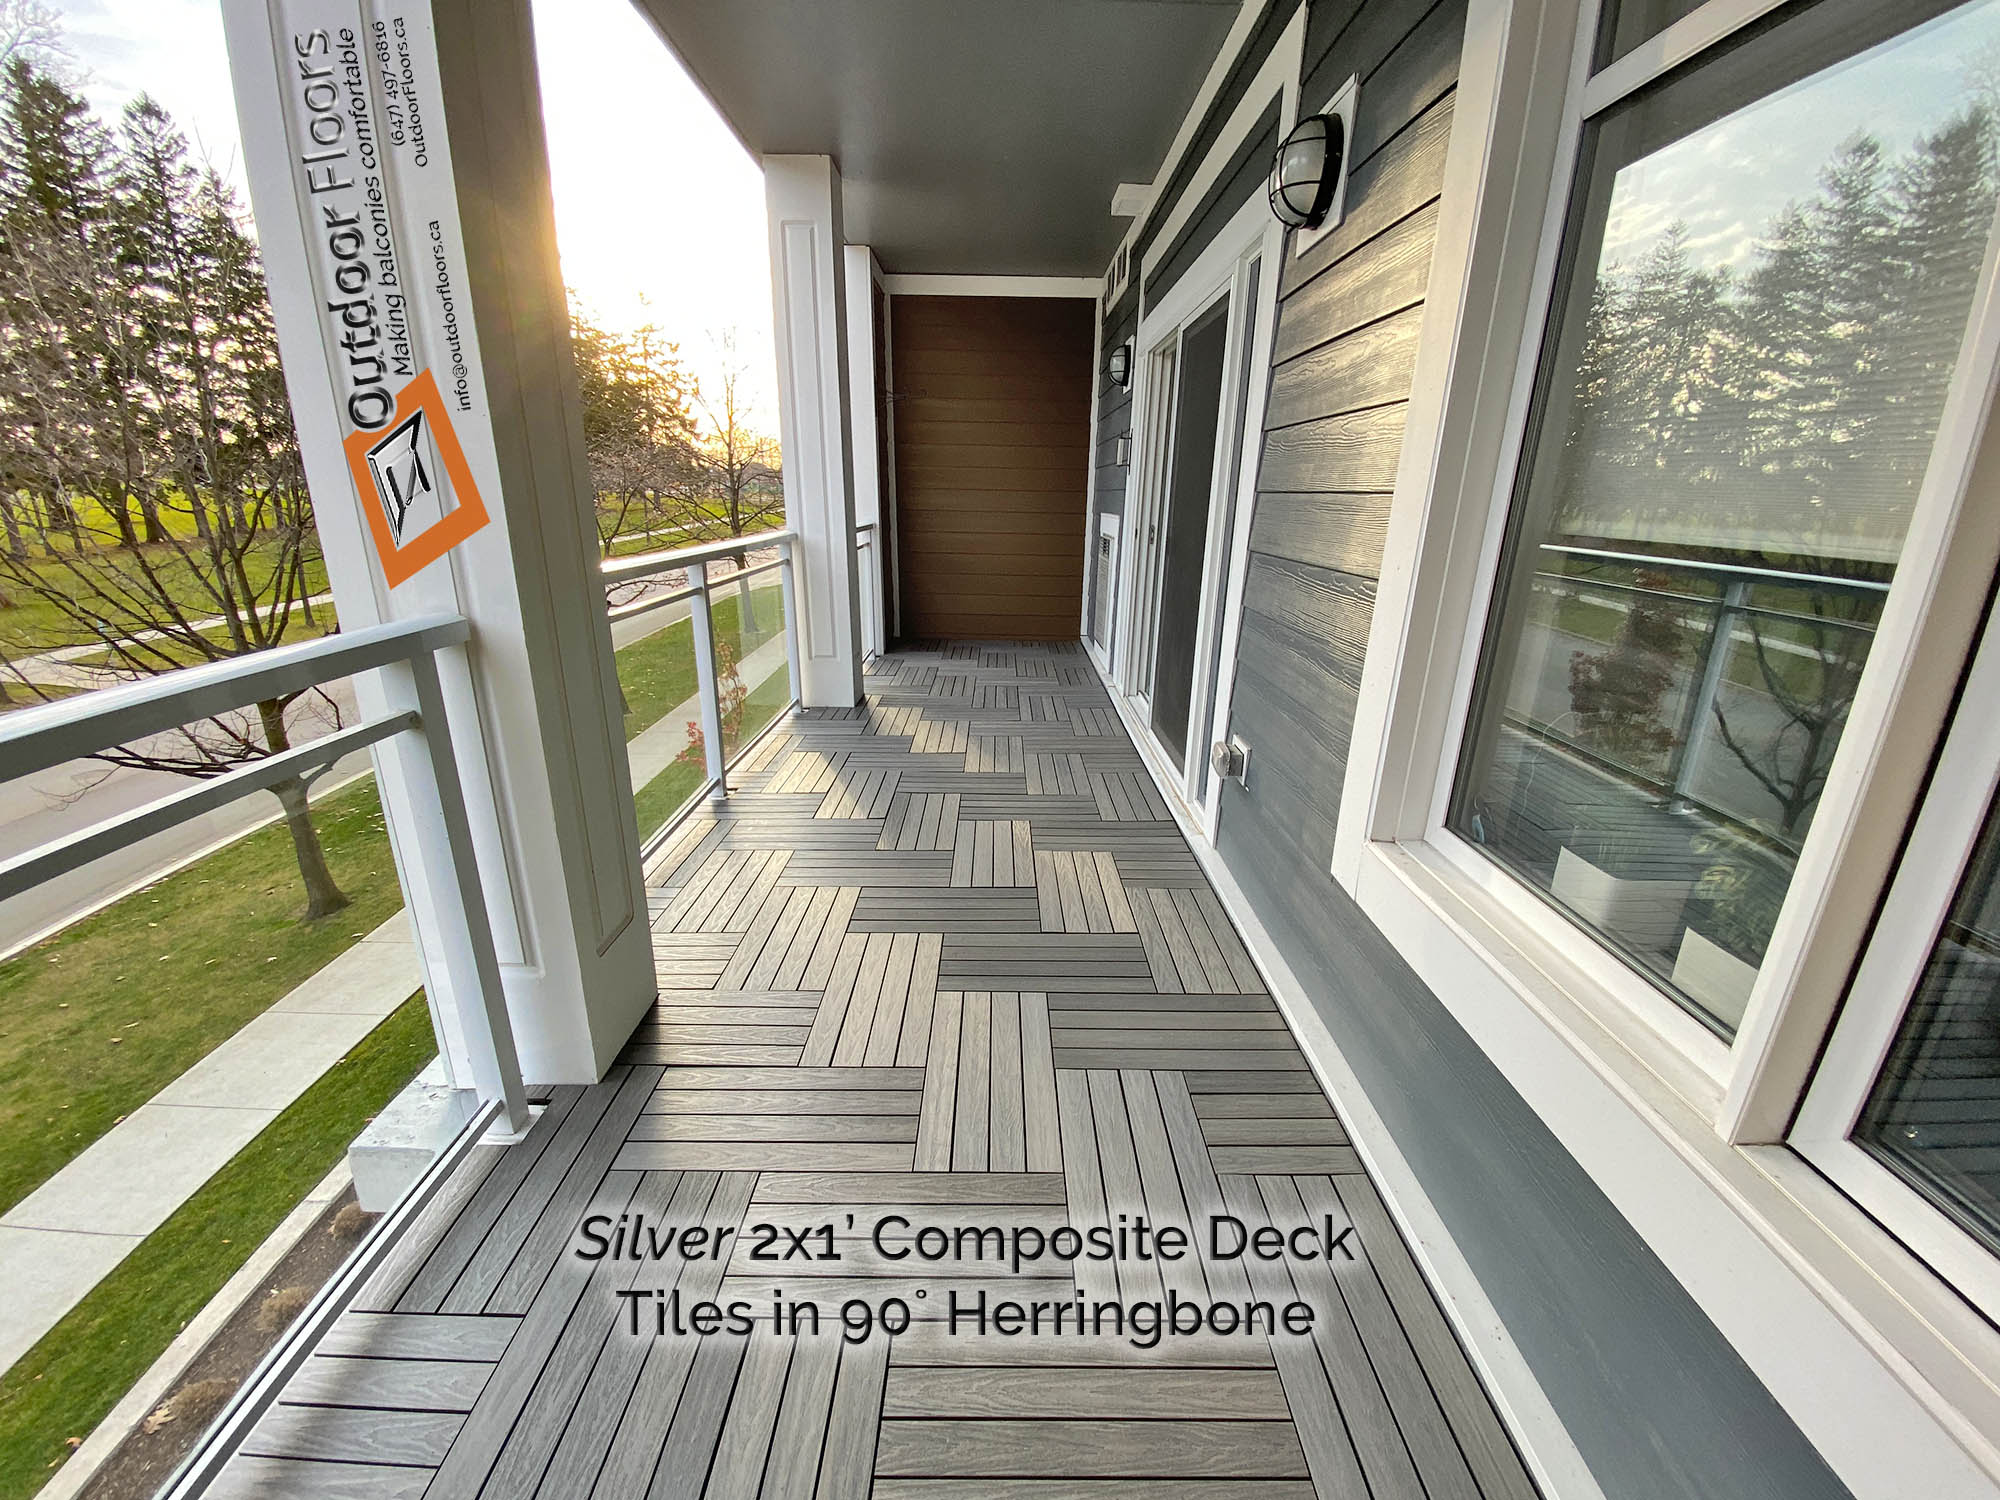 Silver 2x1' Composite Deck Tiles on Whitby Waterside Balcony